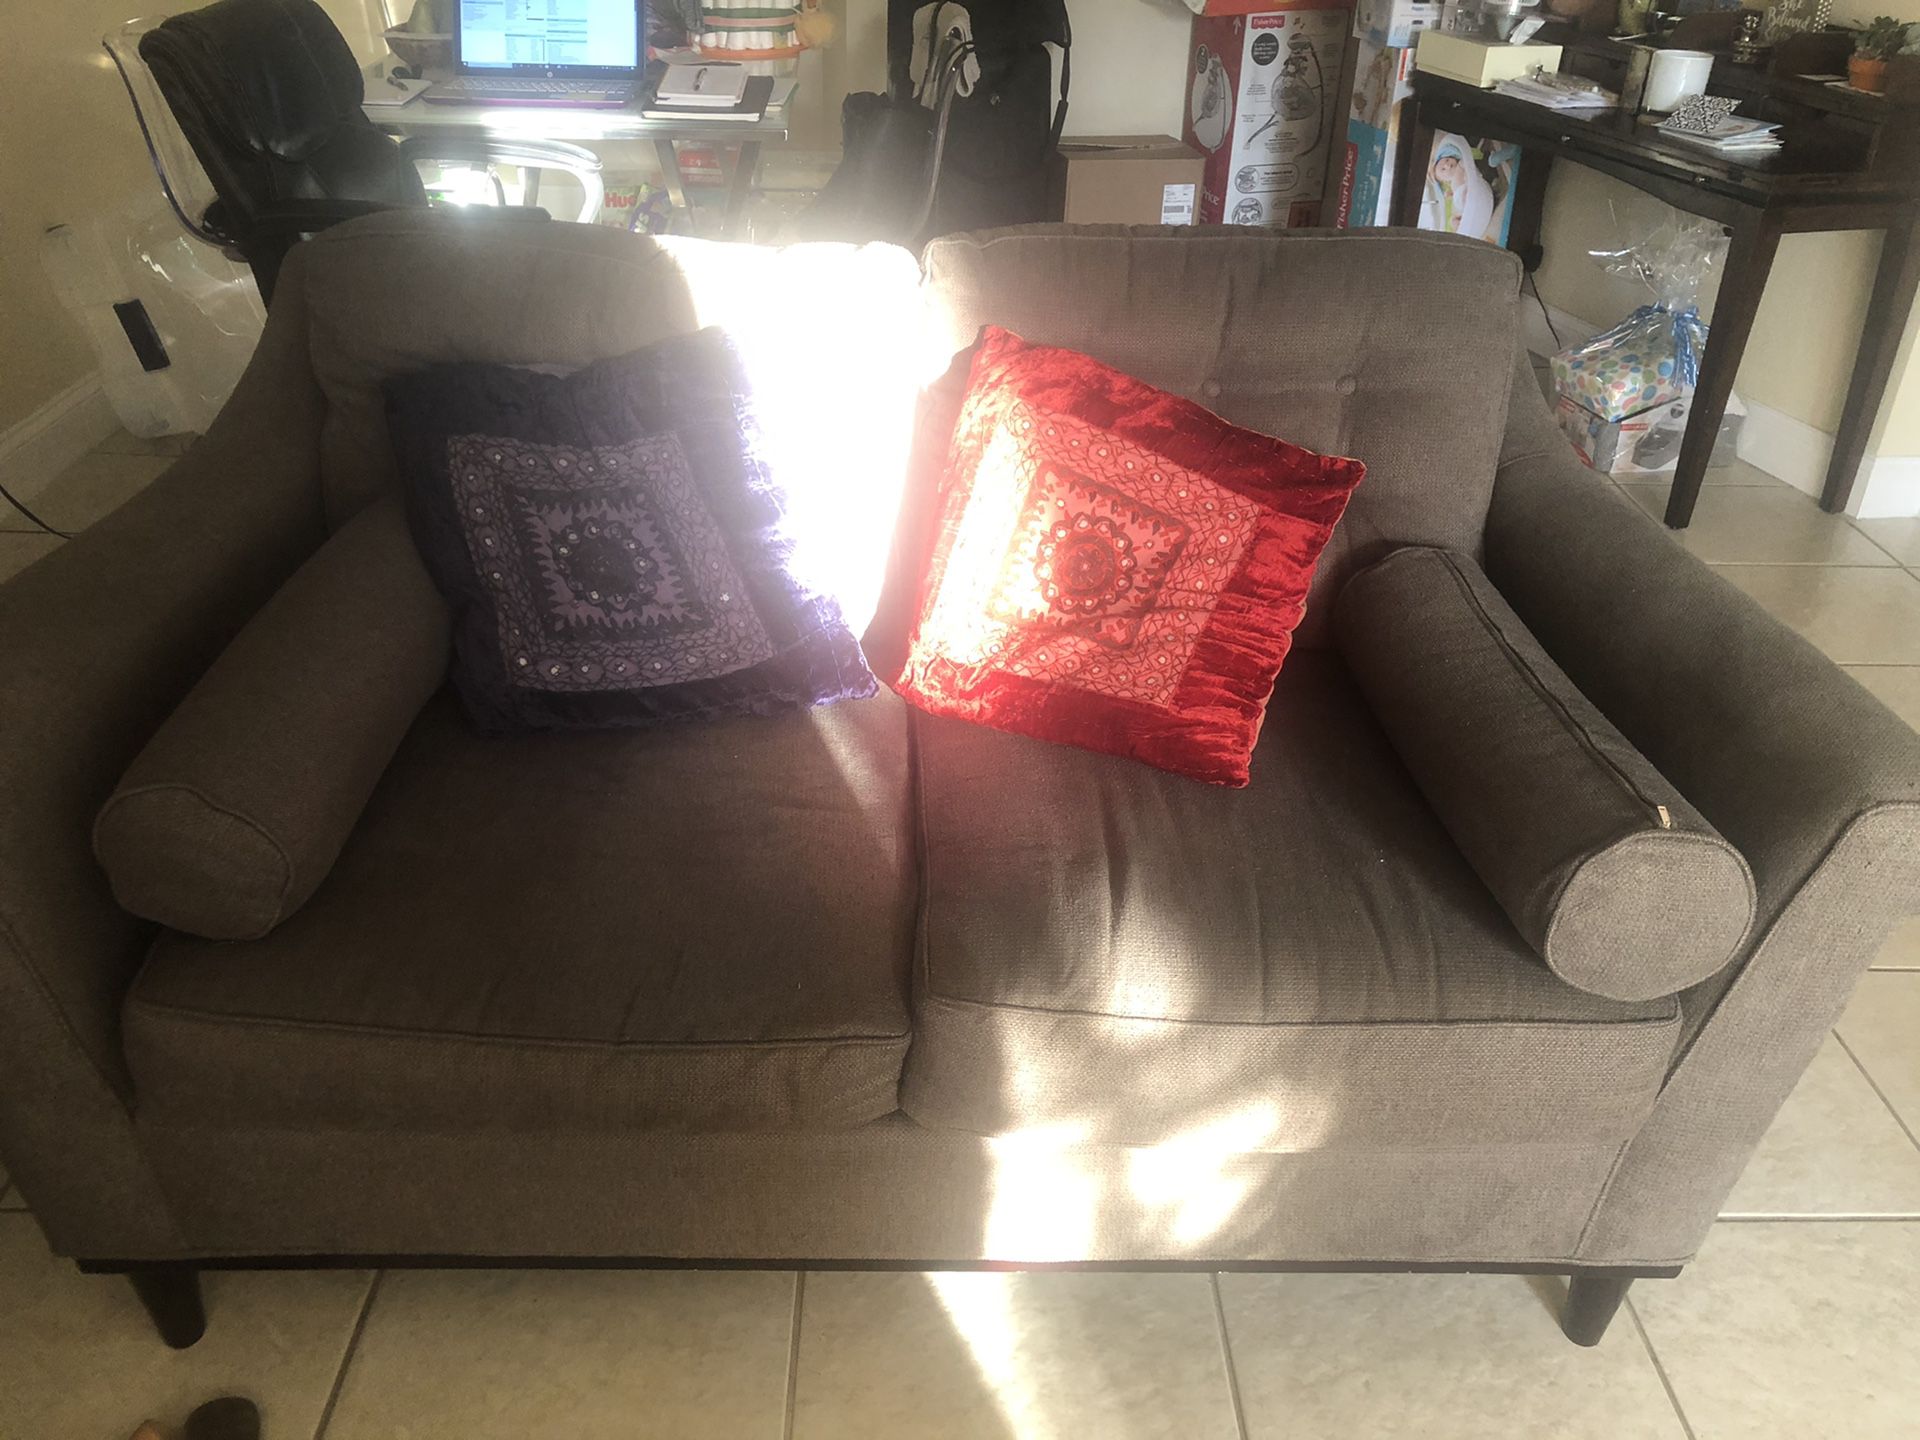 BUNDLE DEAL! Sofa, coffee table, end table and lamp!